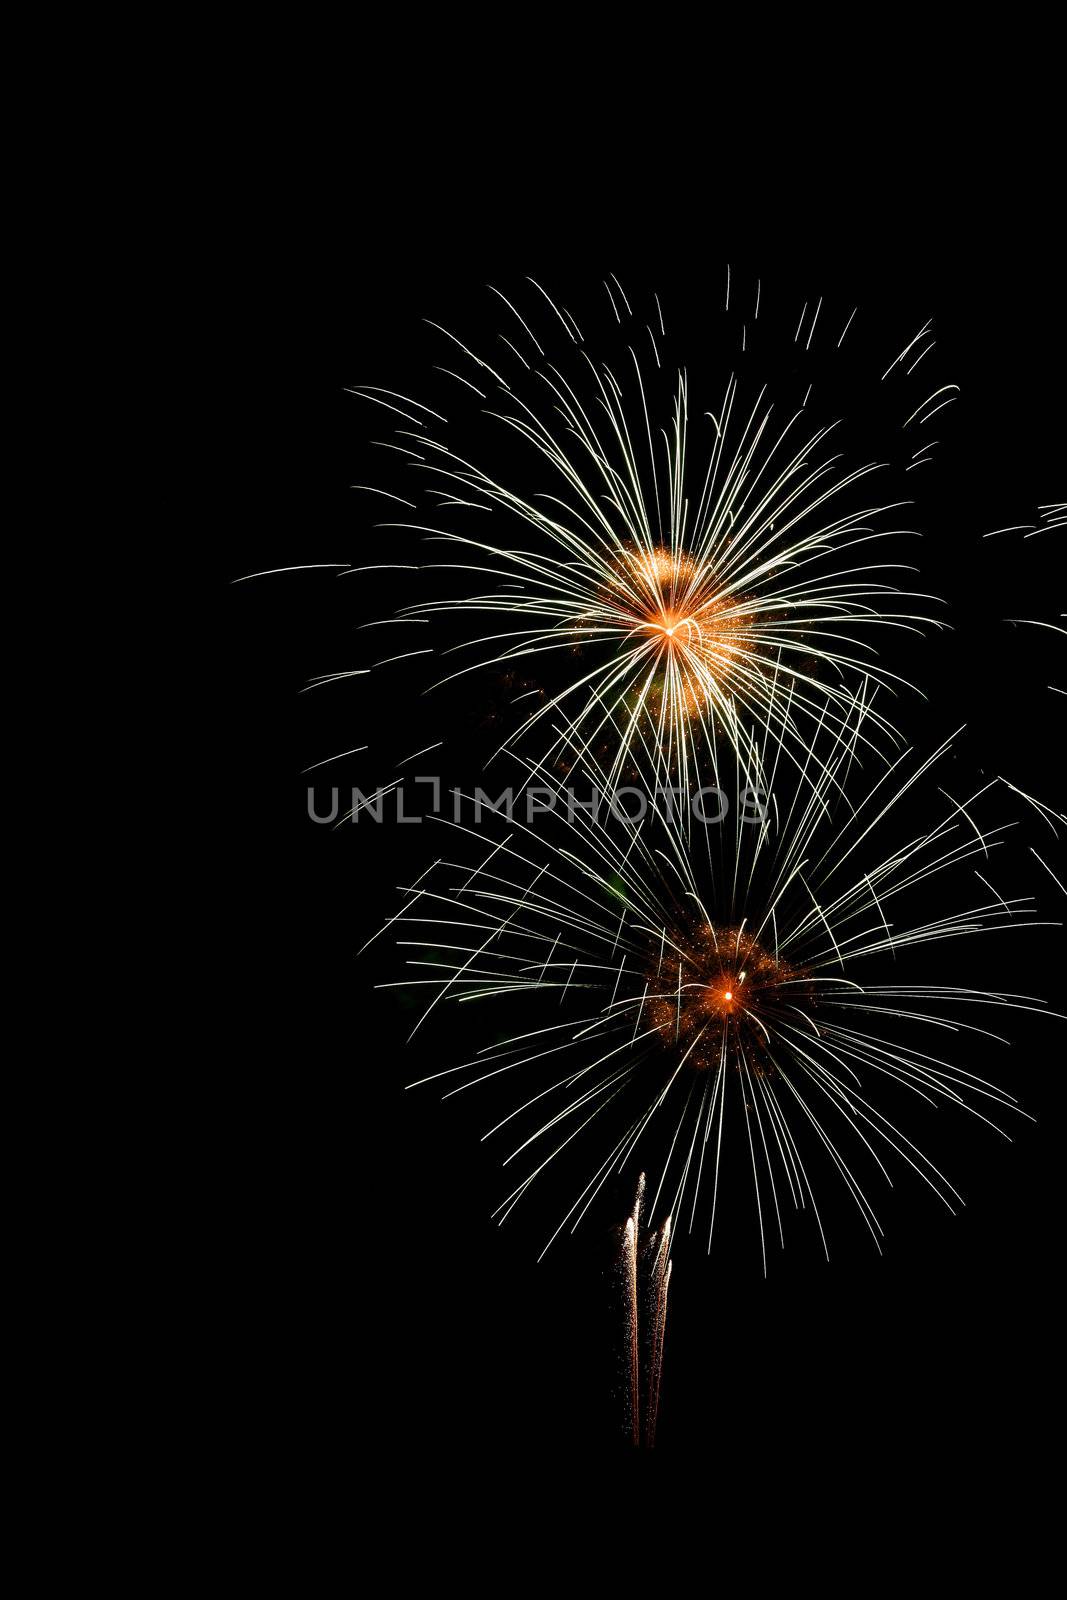 brightly colorful fireworks by sergey_nivens